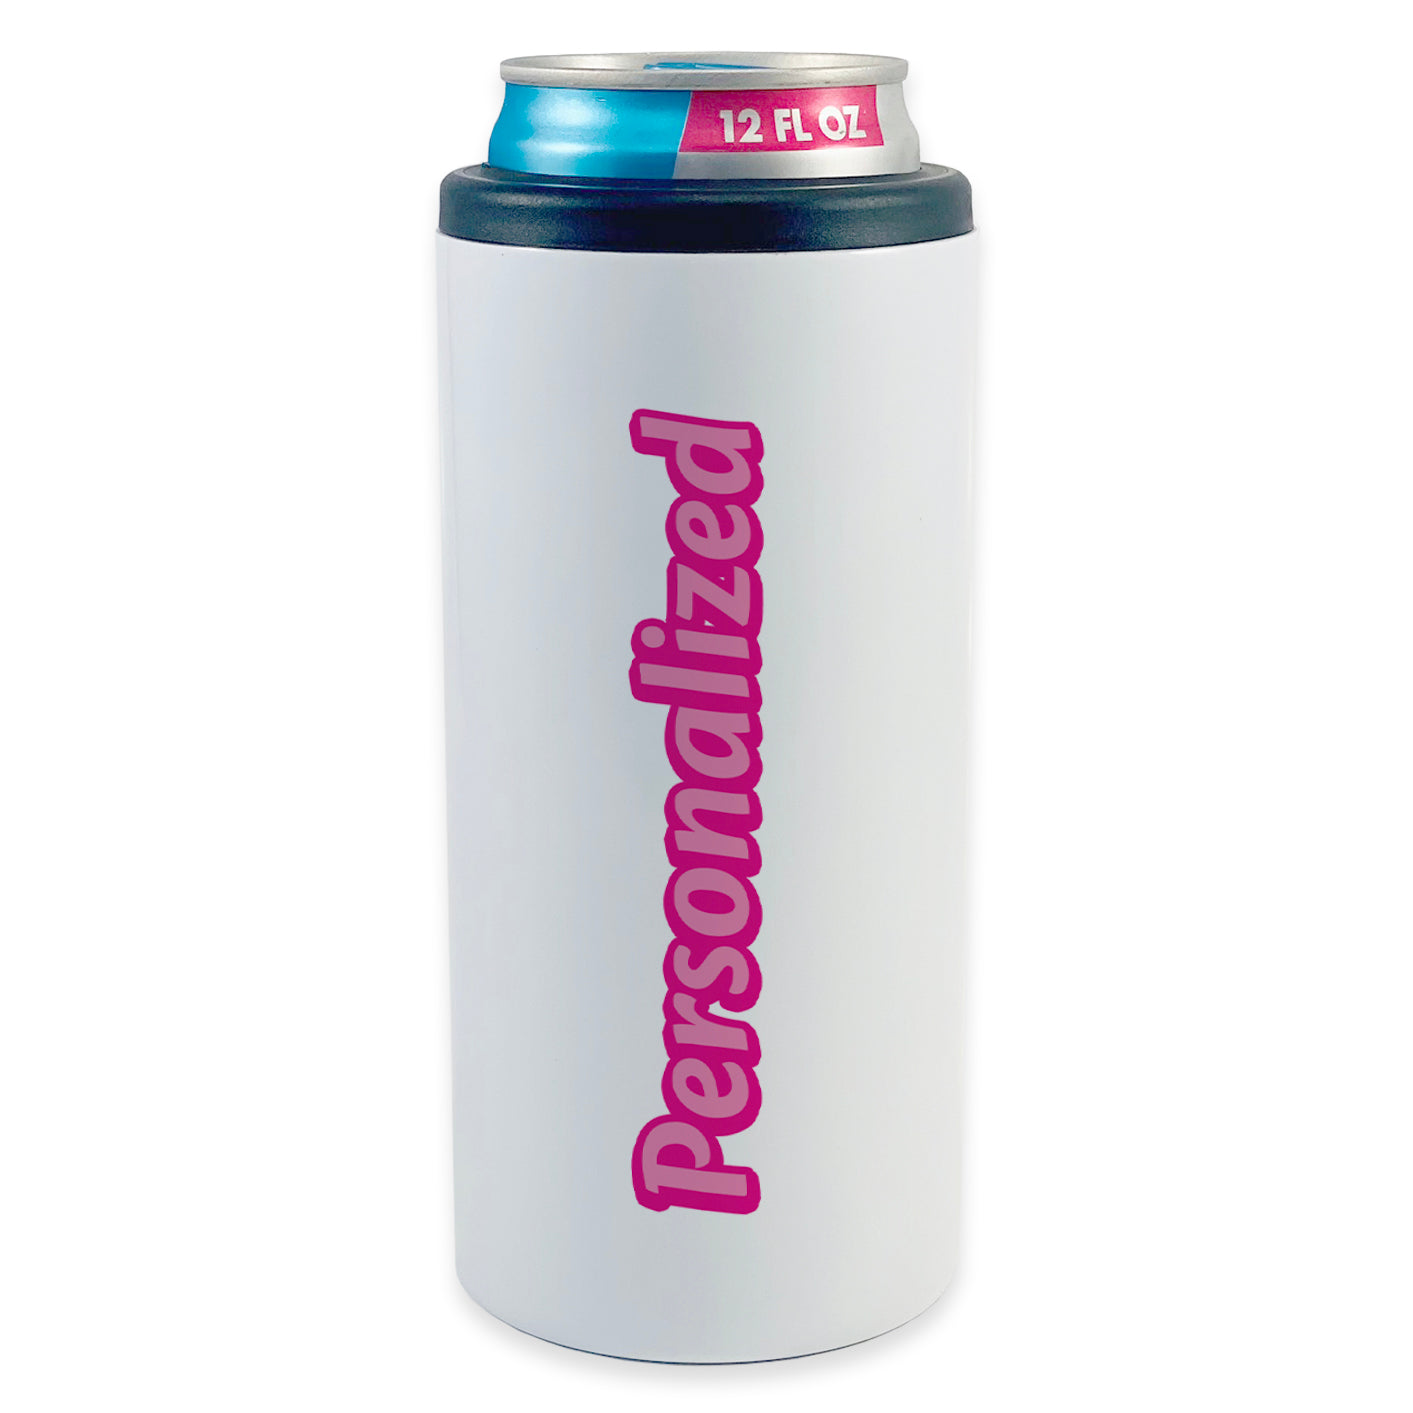 Bridal Collection (Come on Babe Let's Go Party - Personalized) 12oz Slim Can Cooler